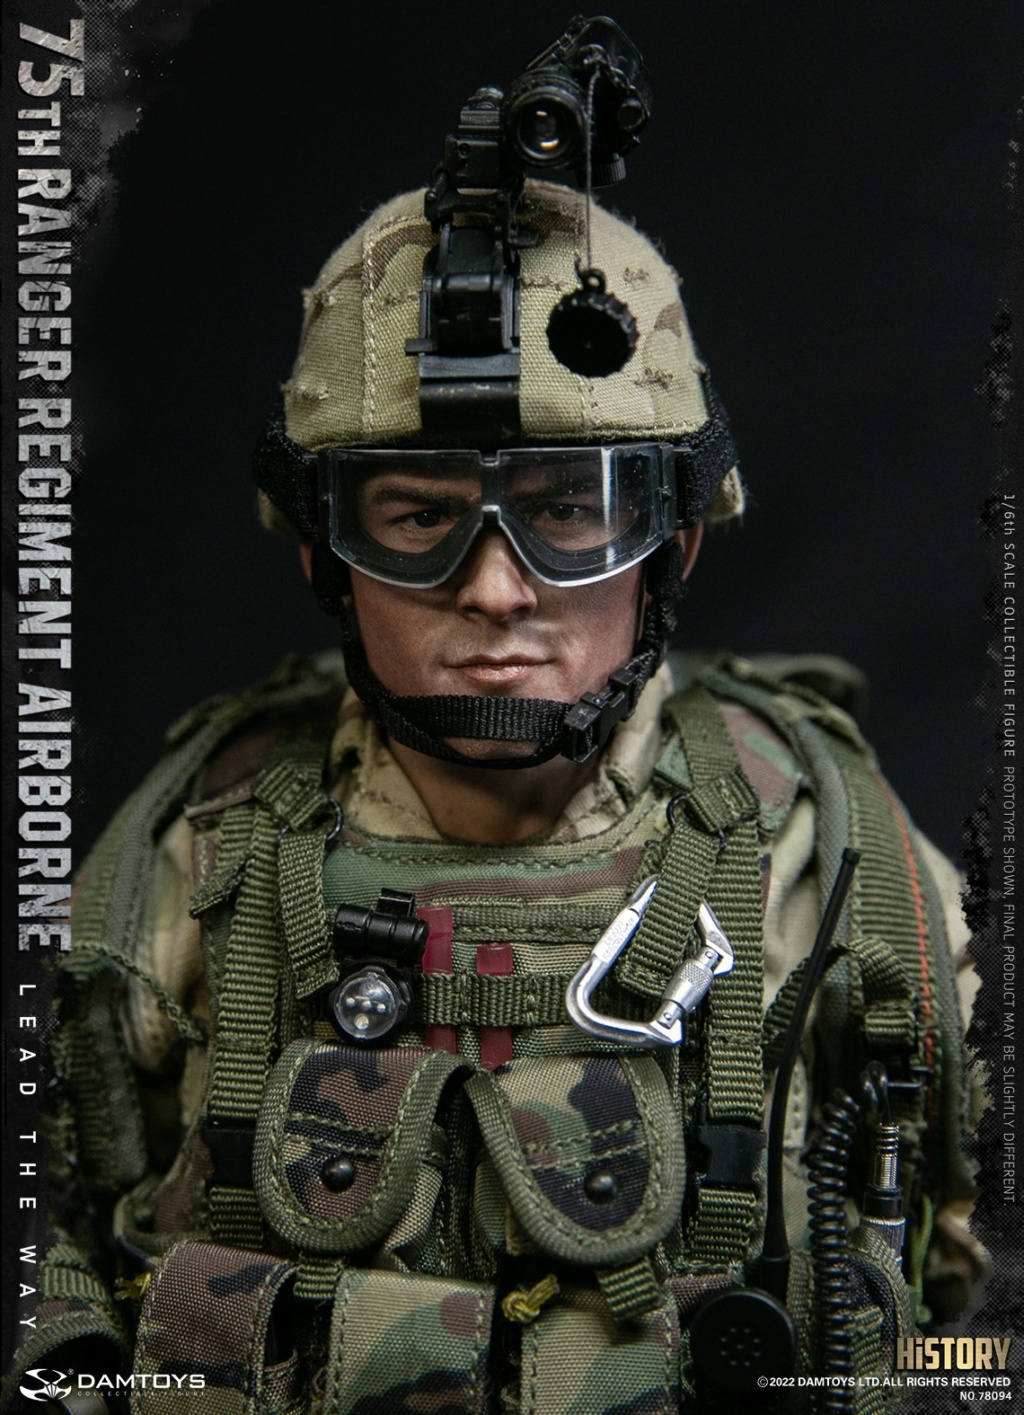 ModernMilitary - NEW PRODUCT: DAMTOYS: 78094 1/6 Scale 75th RANGER REGIMENT AIRBORNE 13320210